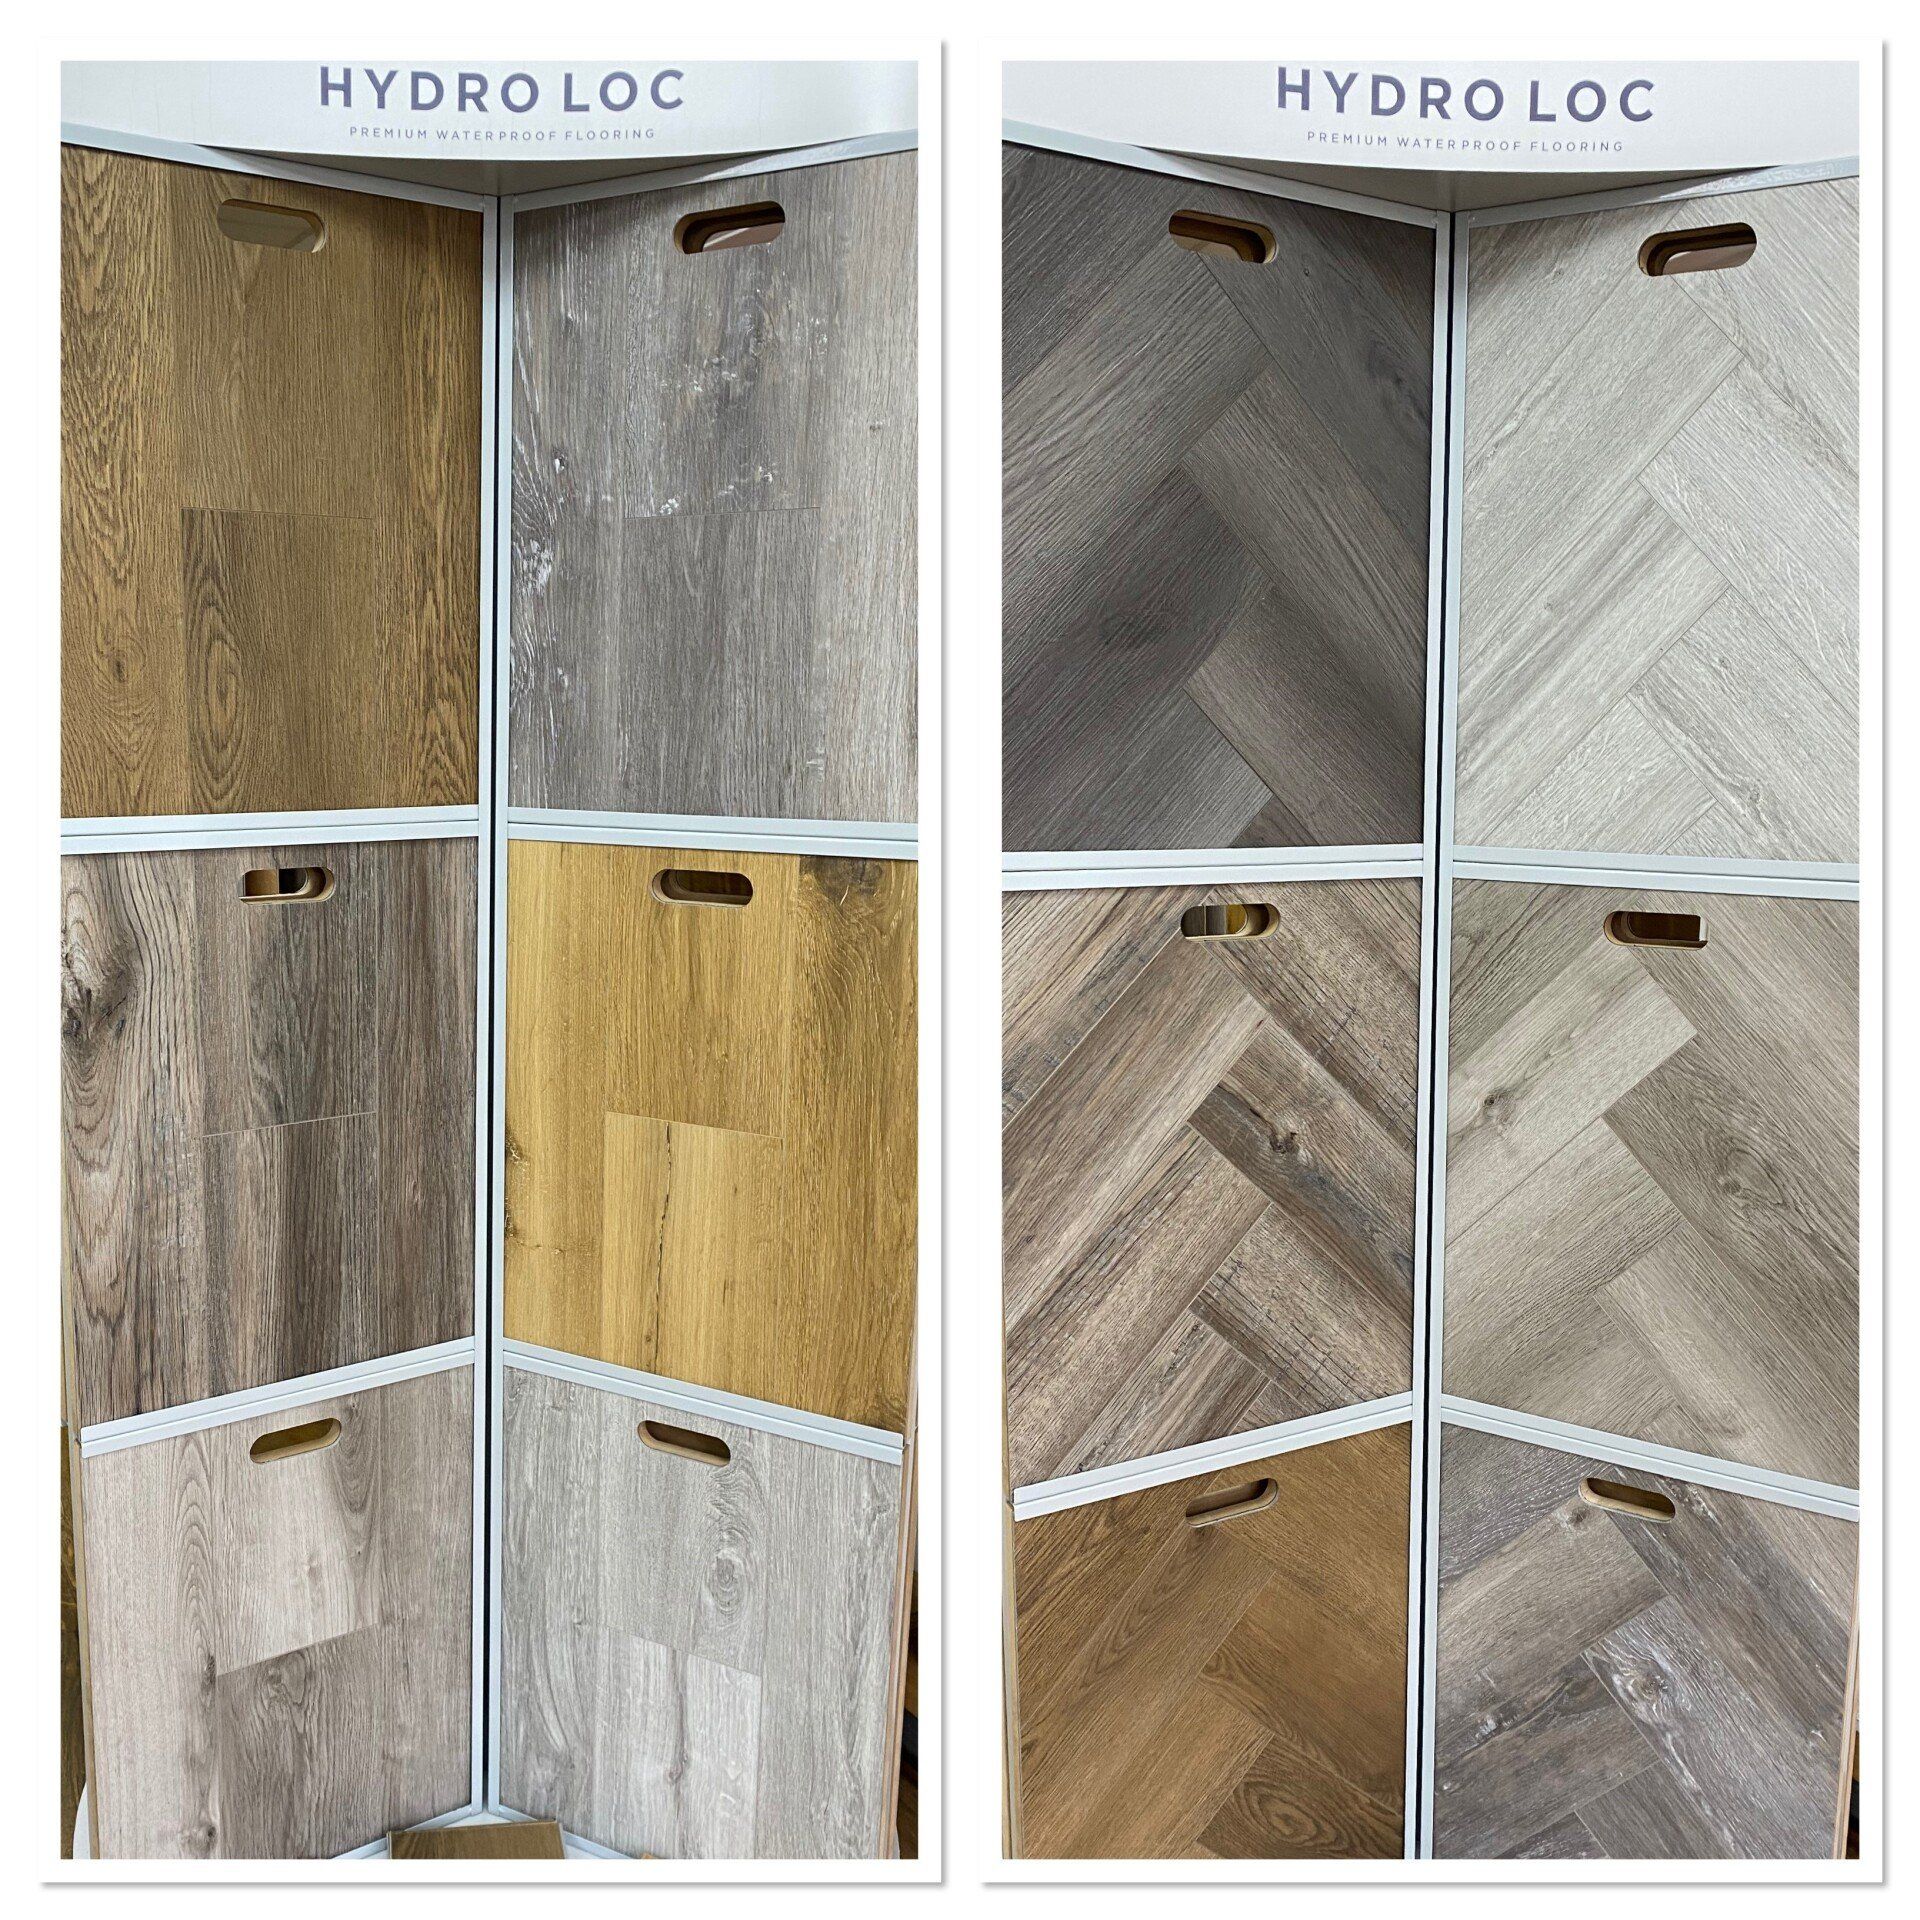 Our New Hydroloc Range